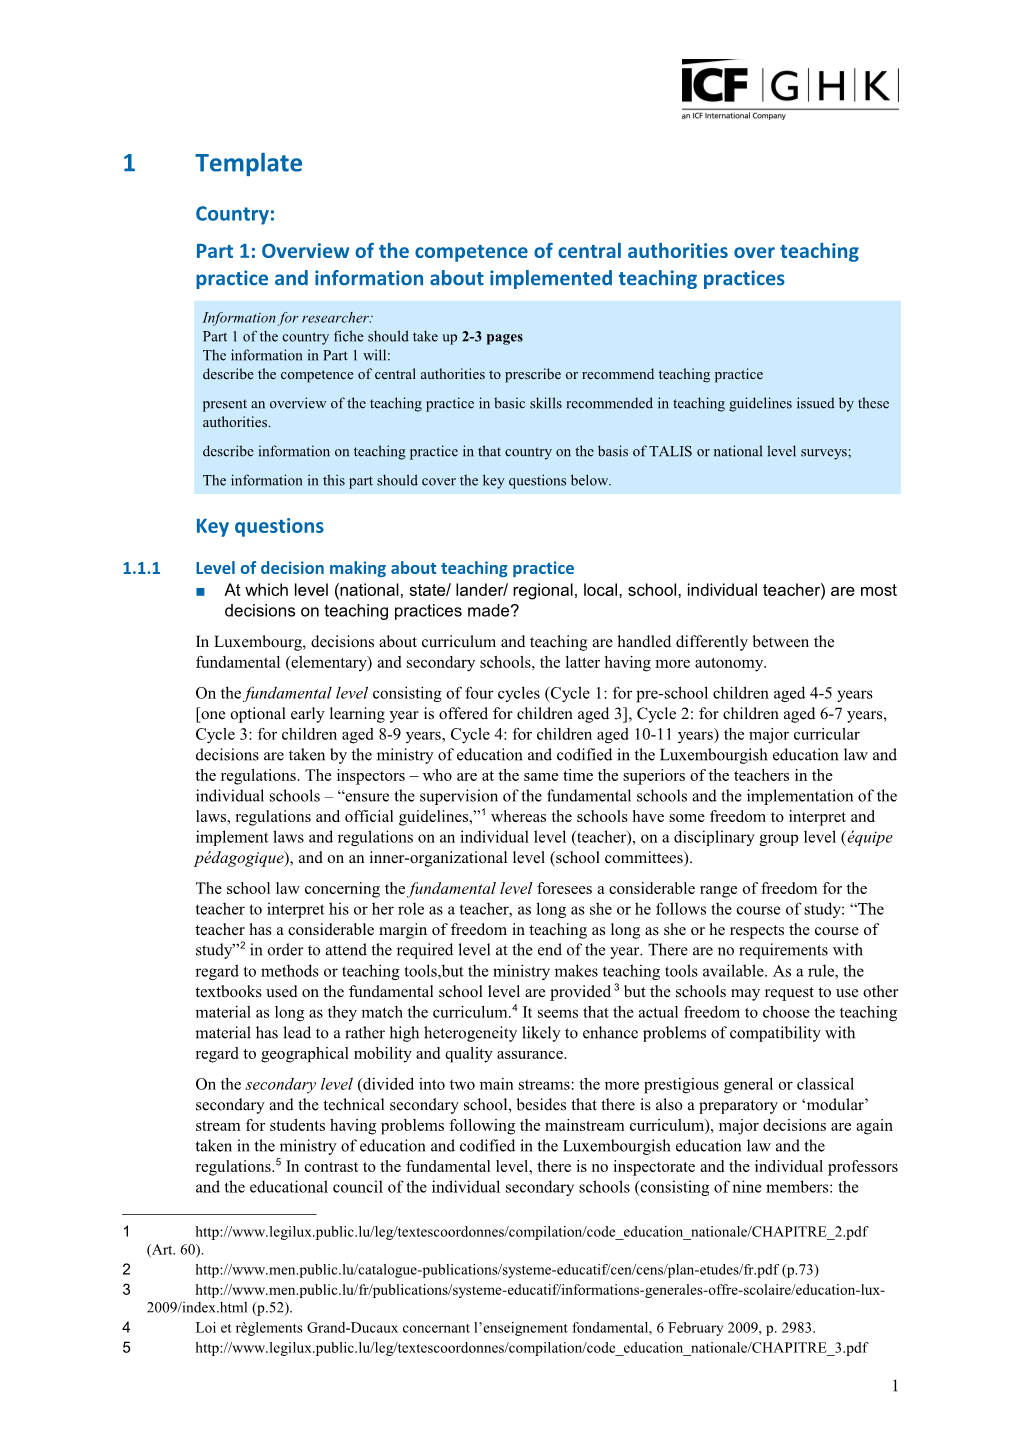 1.1.1 Level of Decision Making About Teaching Practice